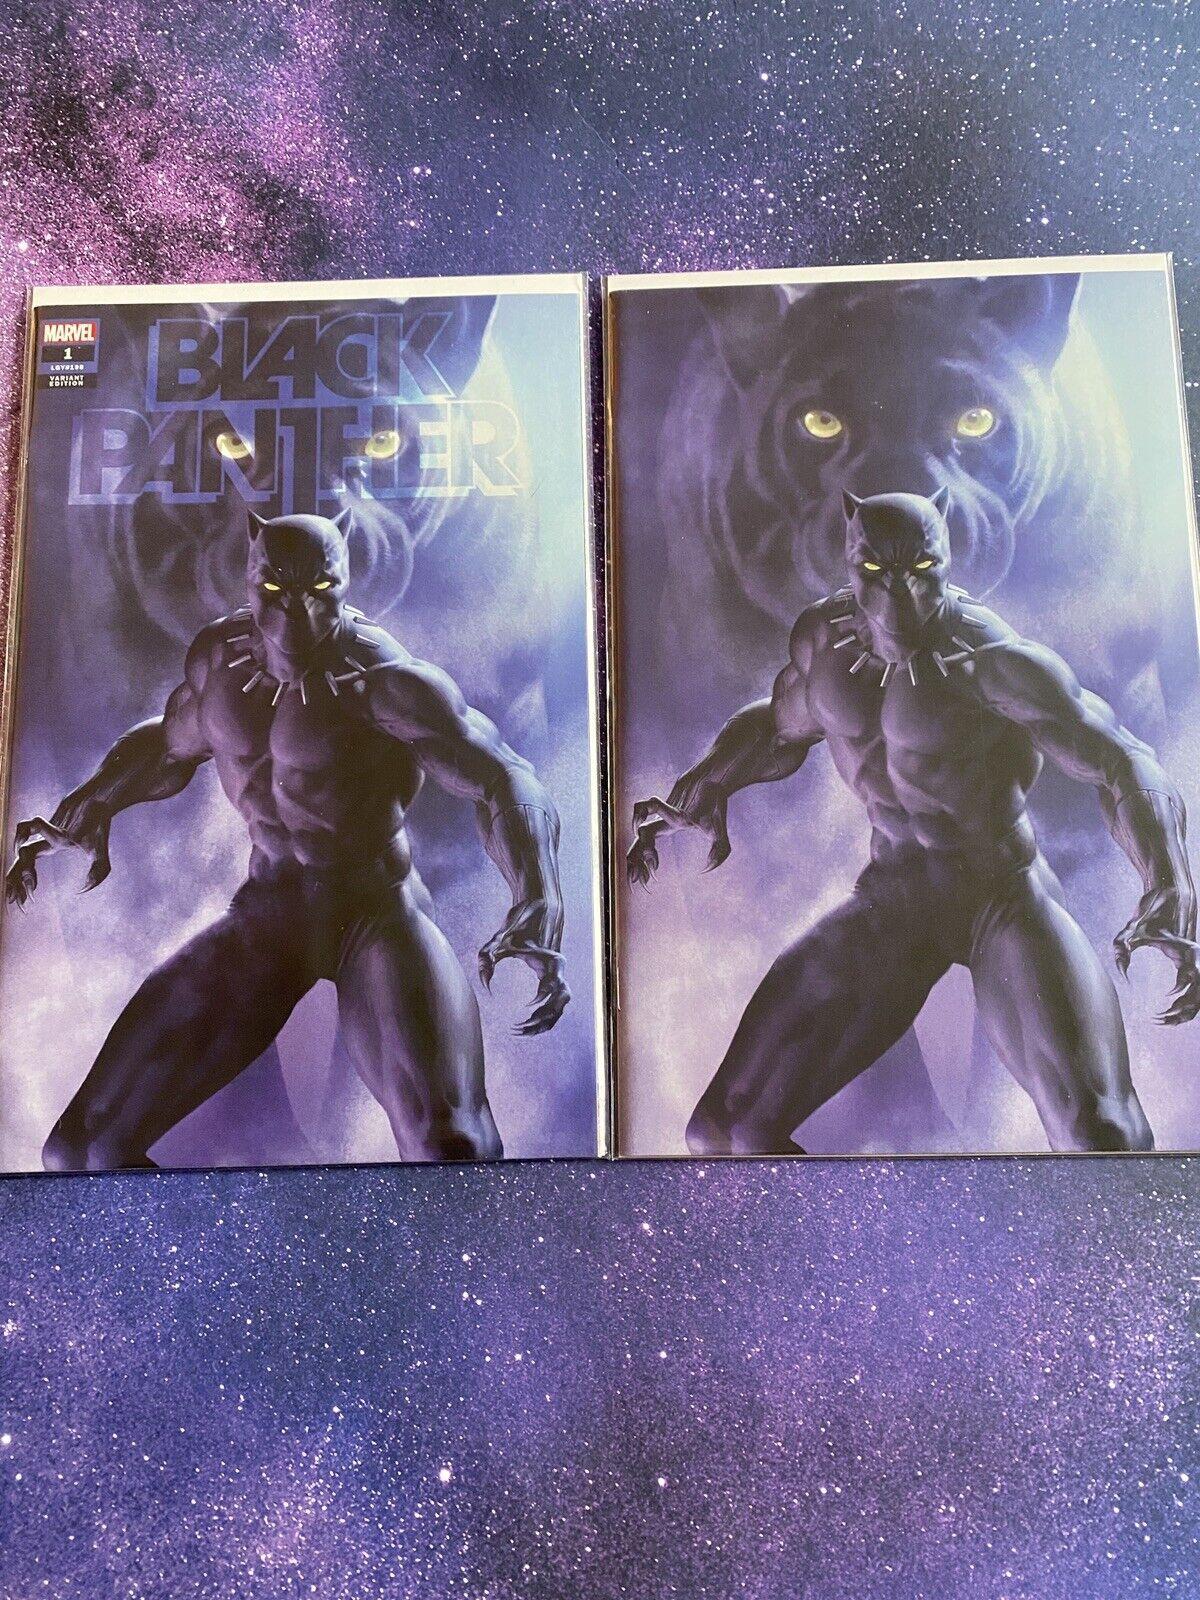 BLACK PANTHER #1 - Exclusive JUNGGEON YOON Trade Dress/Virgin Variant Cover Set